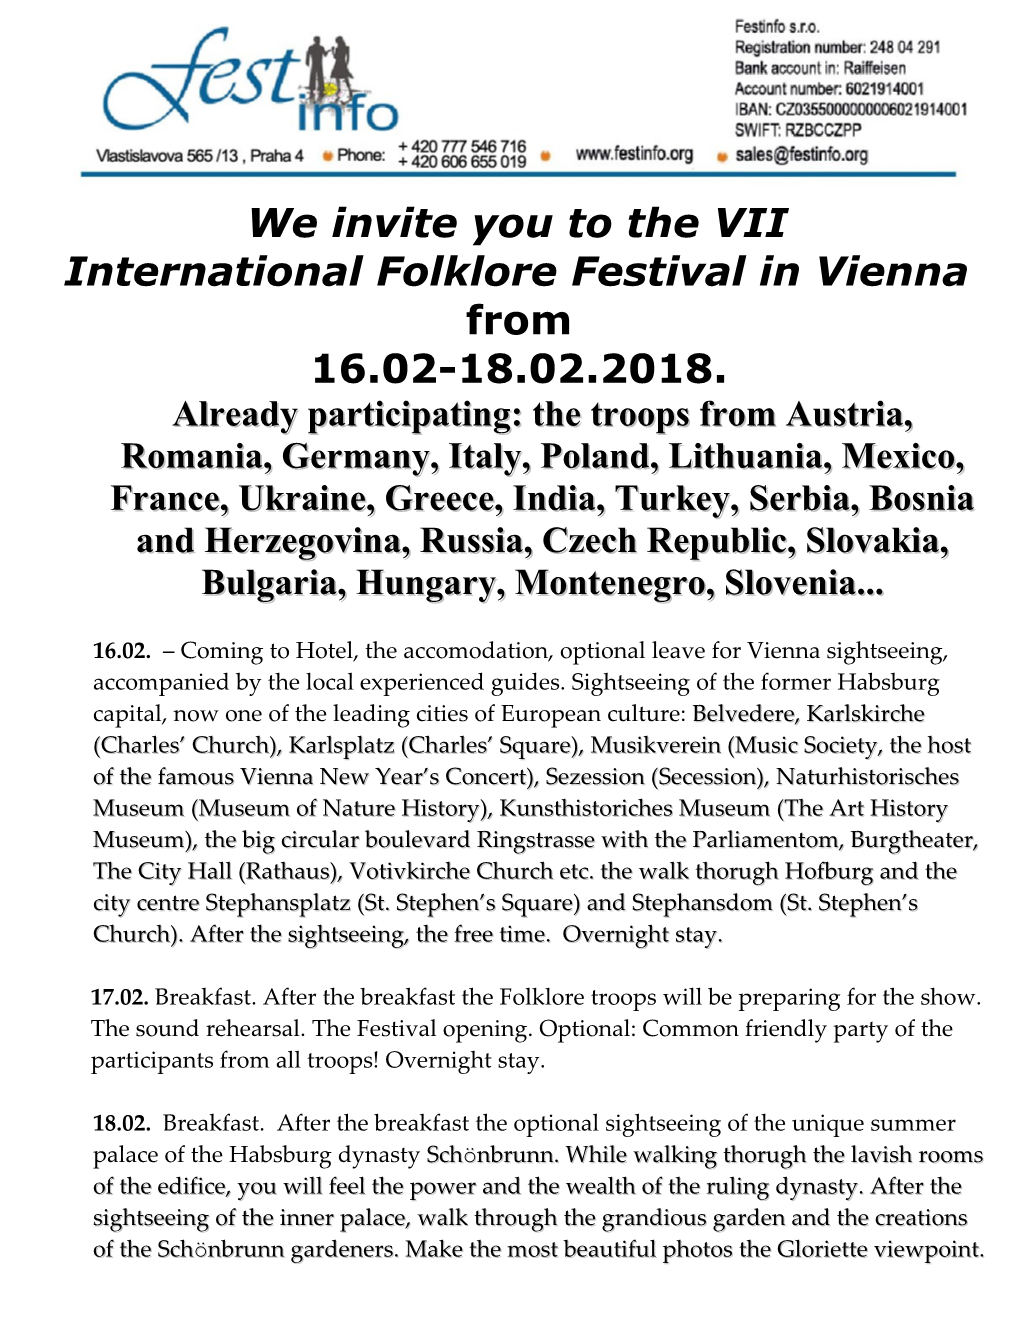 We Invite You to the VII